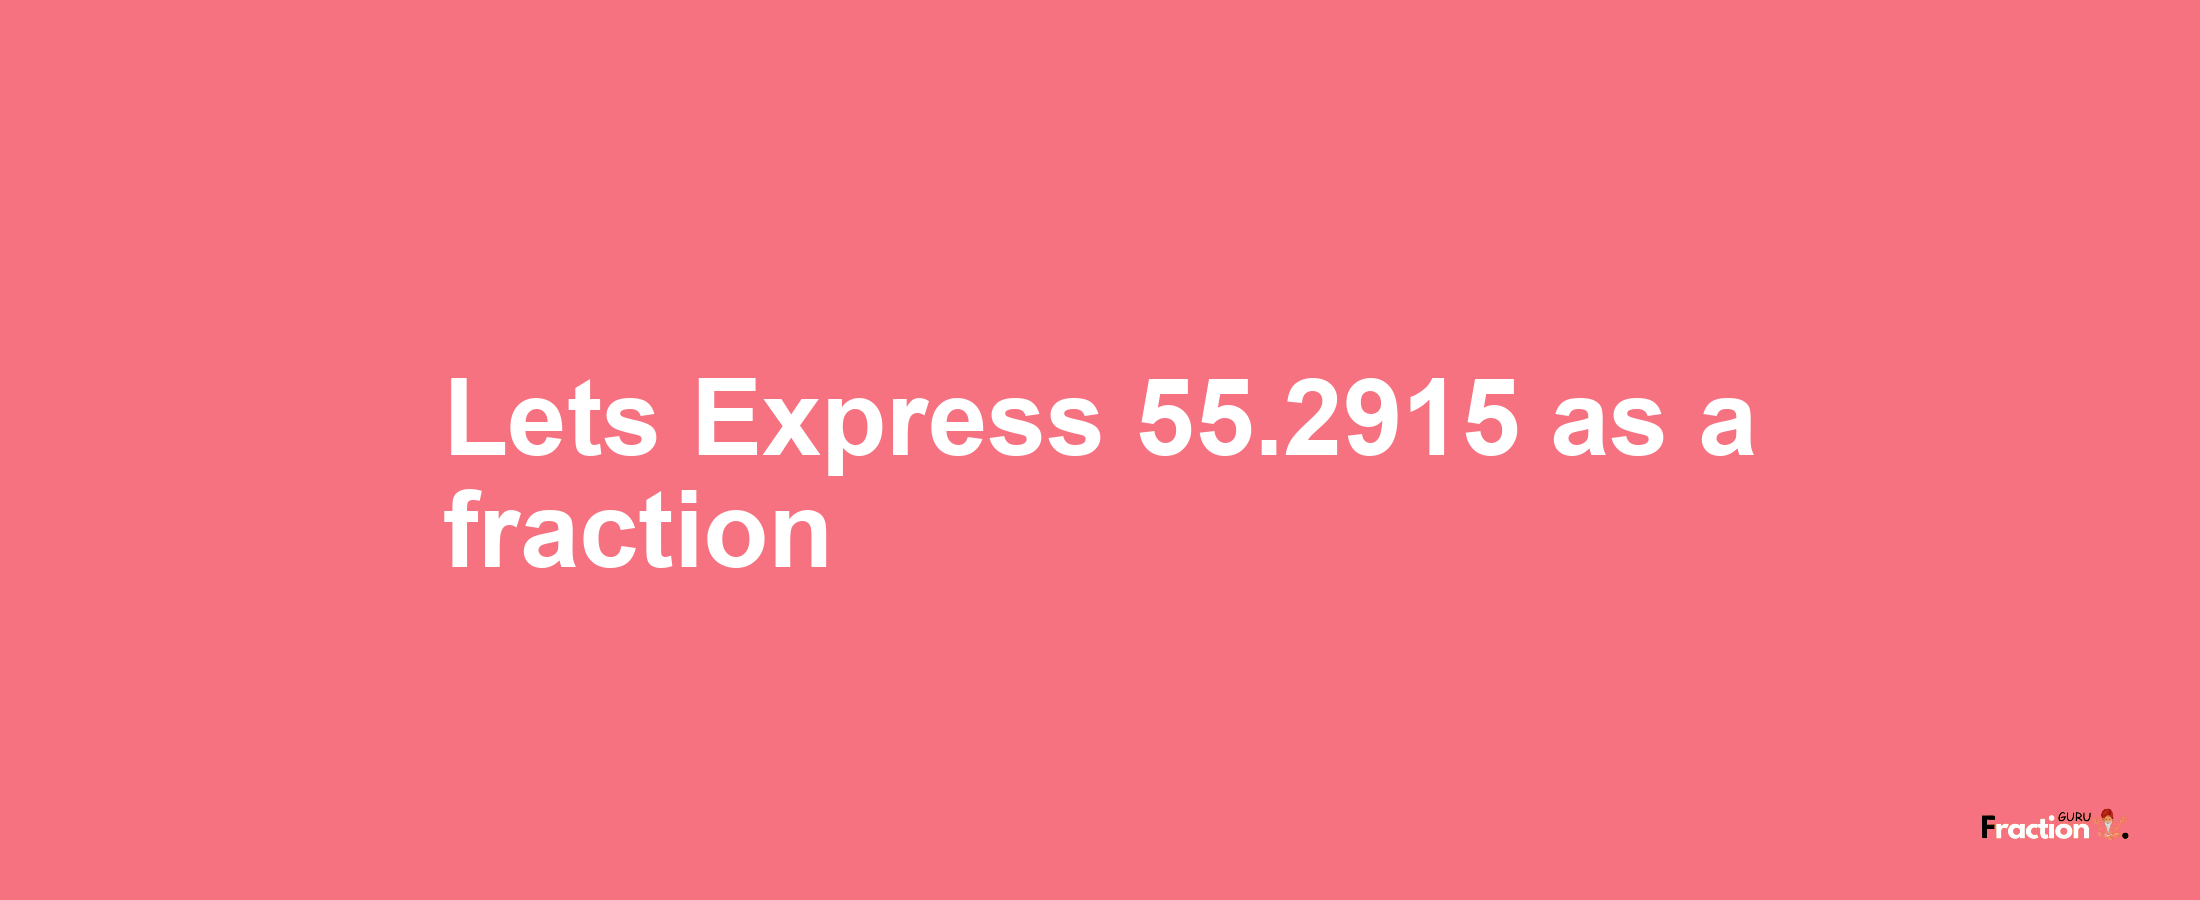 Lets Express 55.2915 as afraction